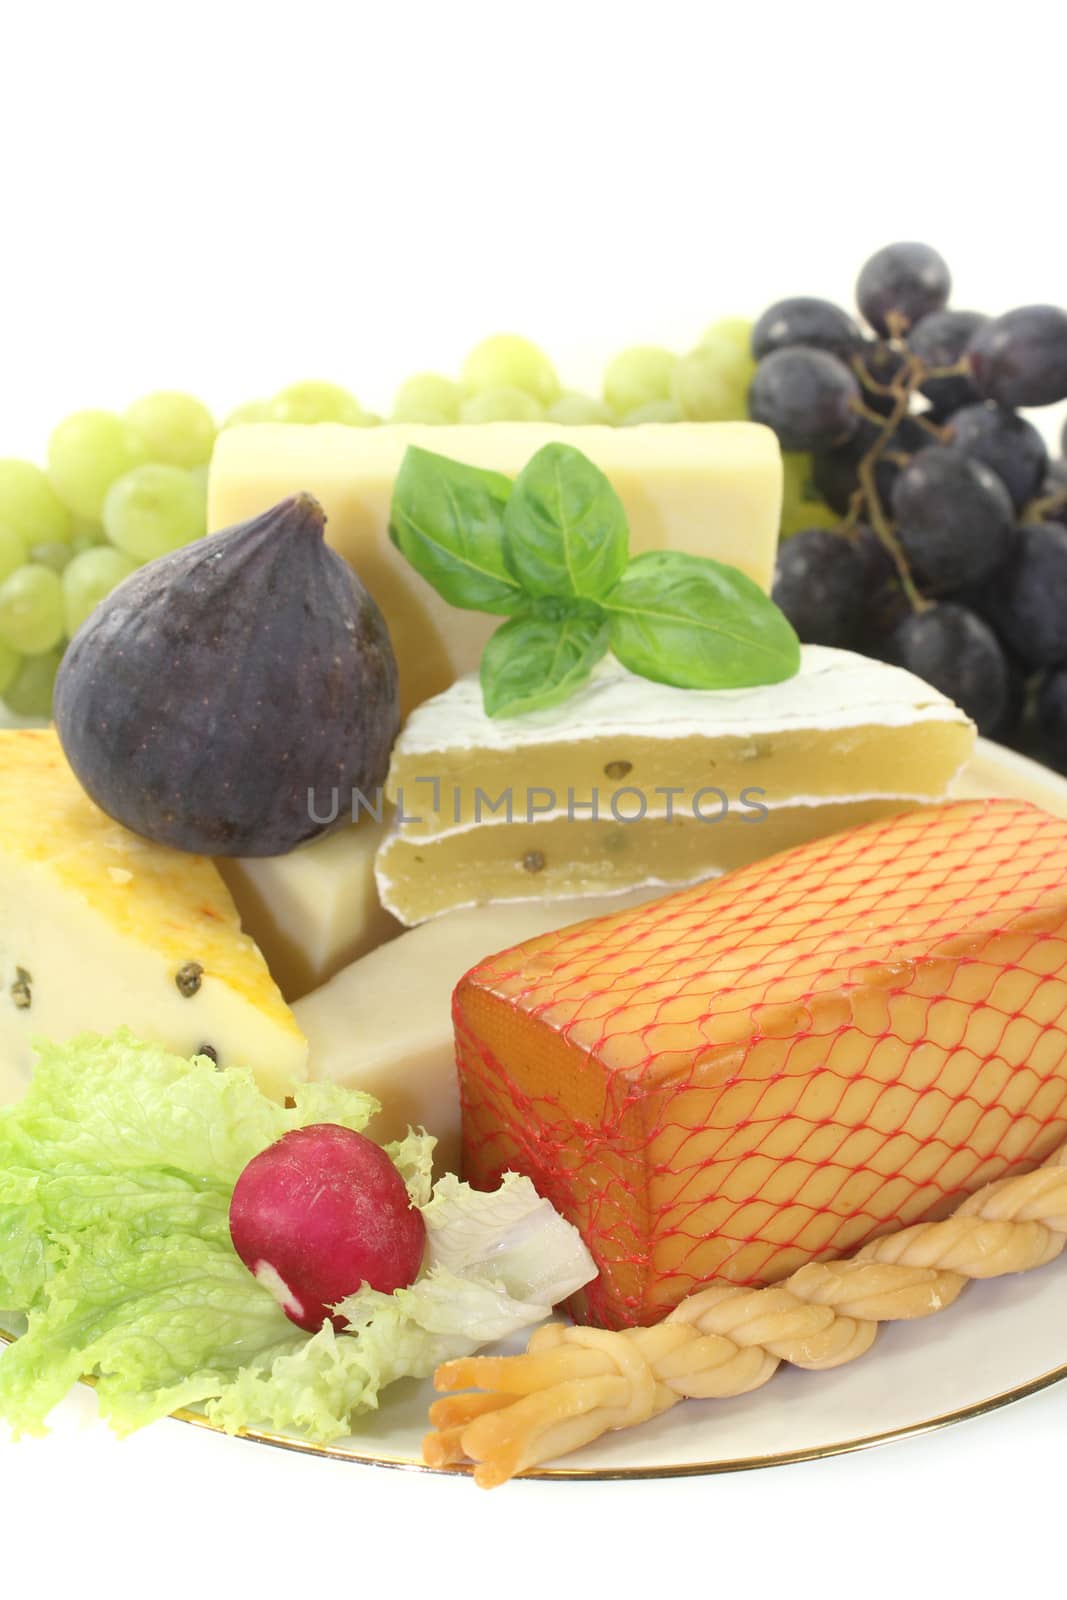 Pieces of cheese with fig, grapes, bread and lettuce